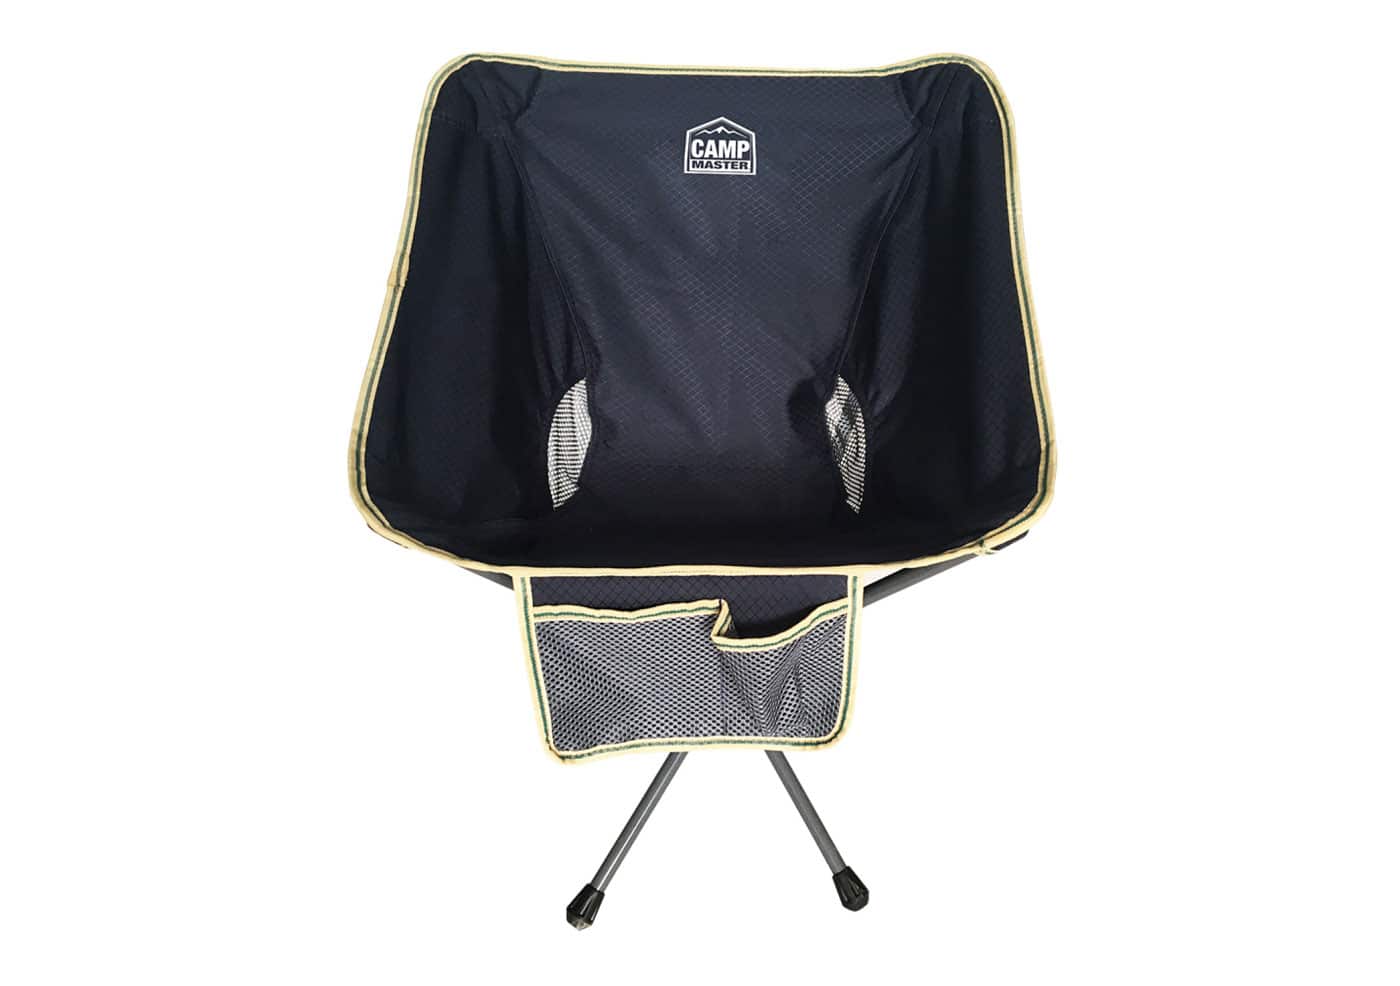 Campmaster Go Anywhere Chair